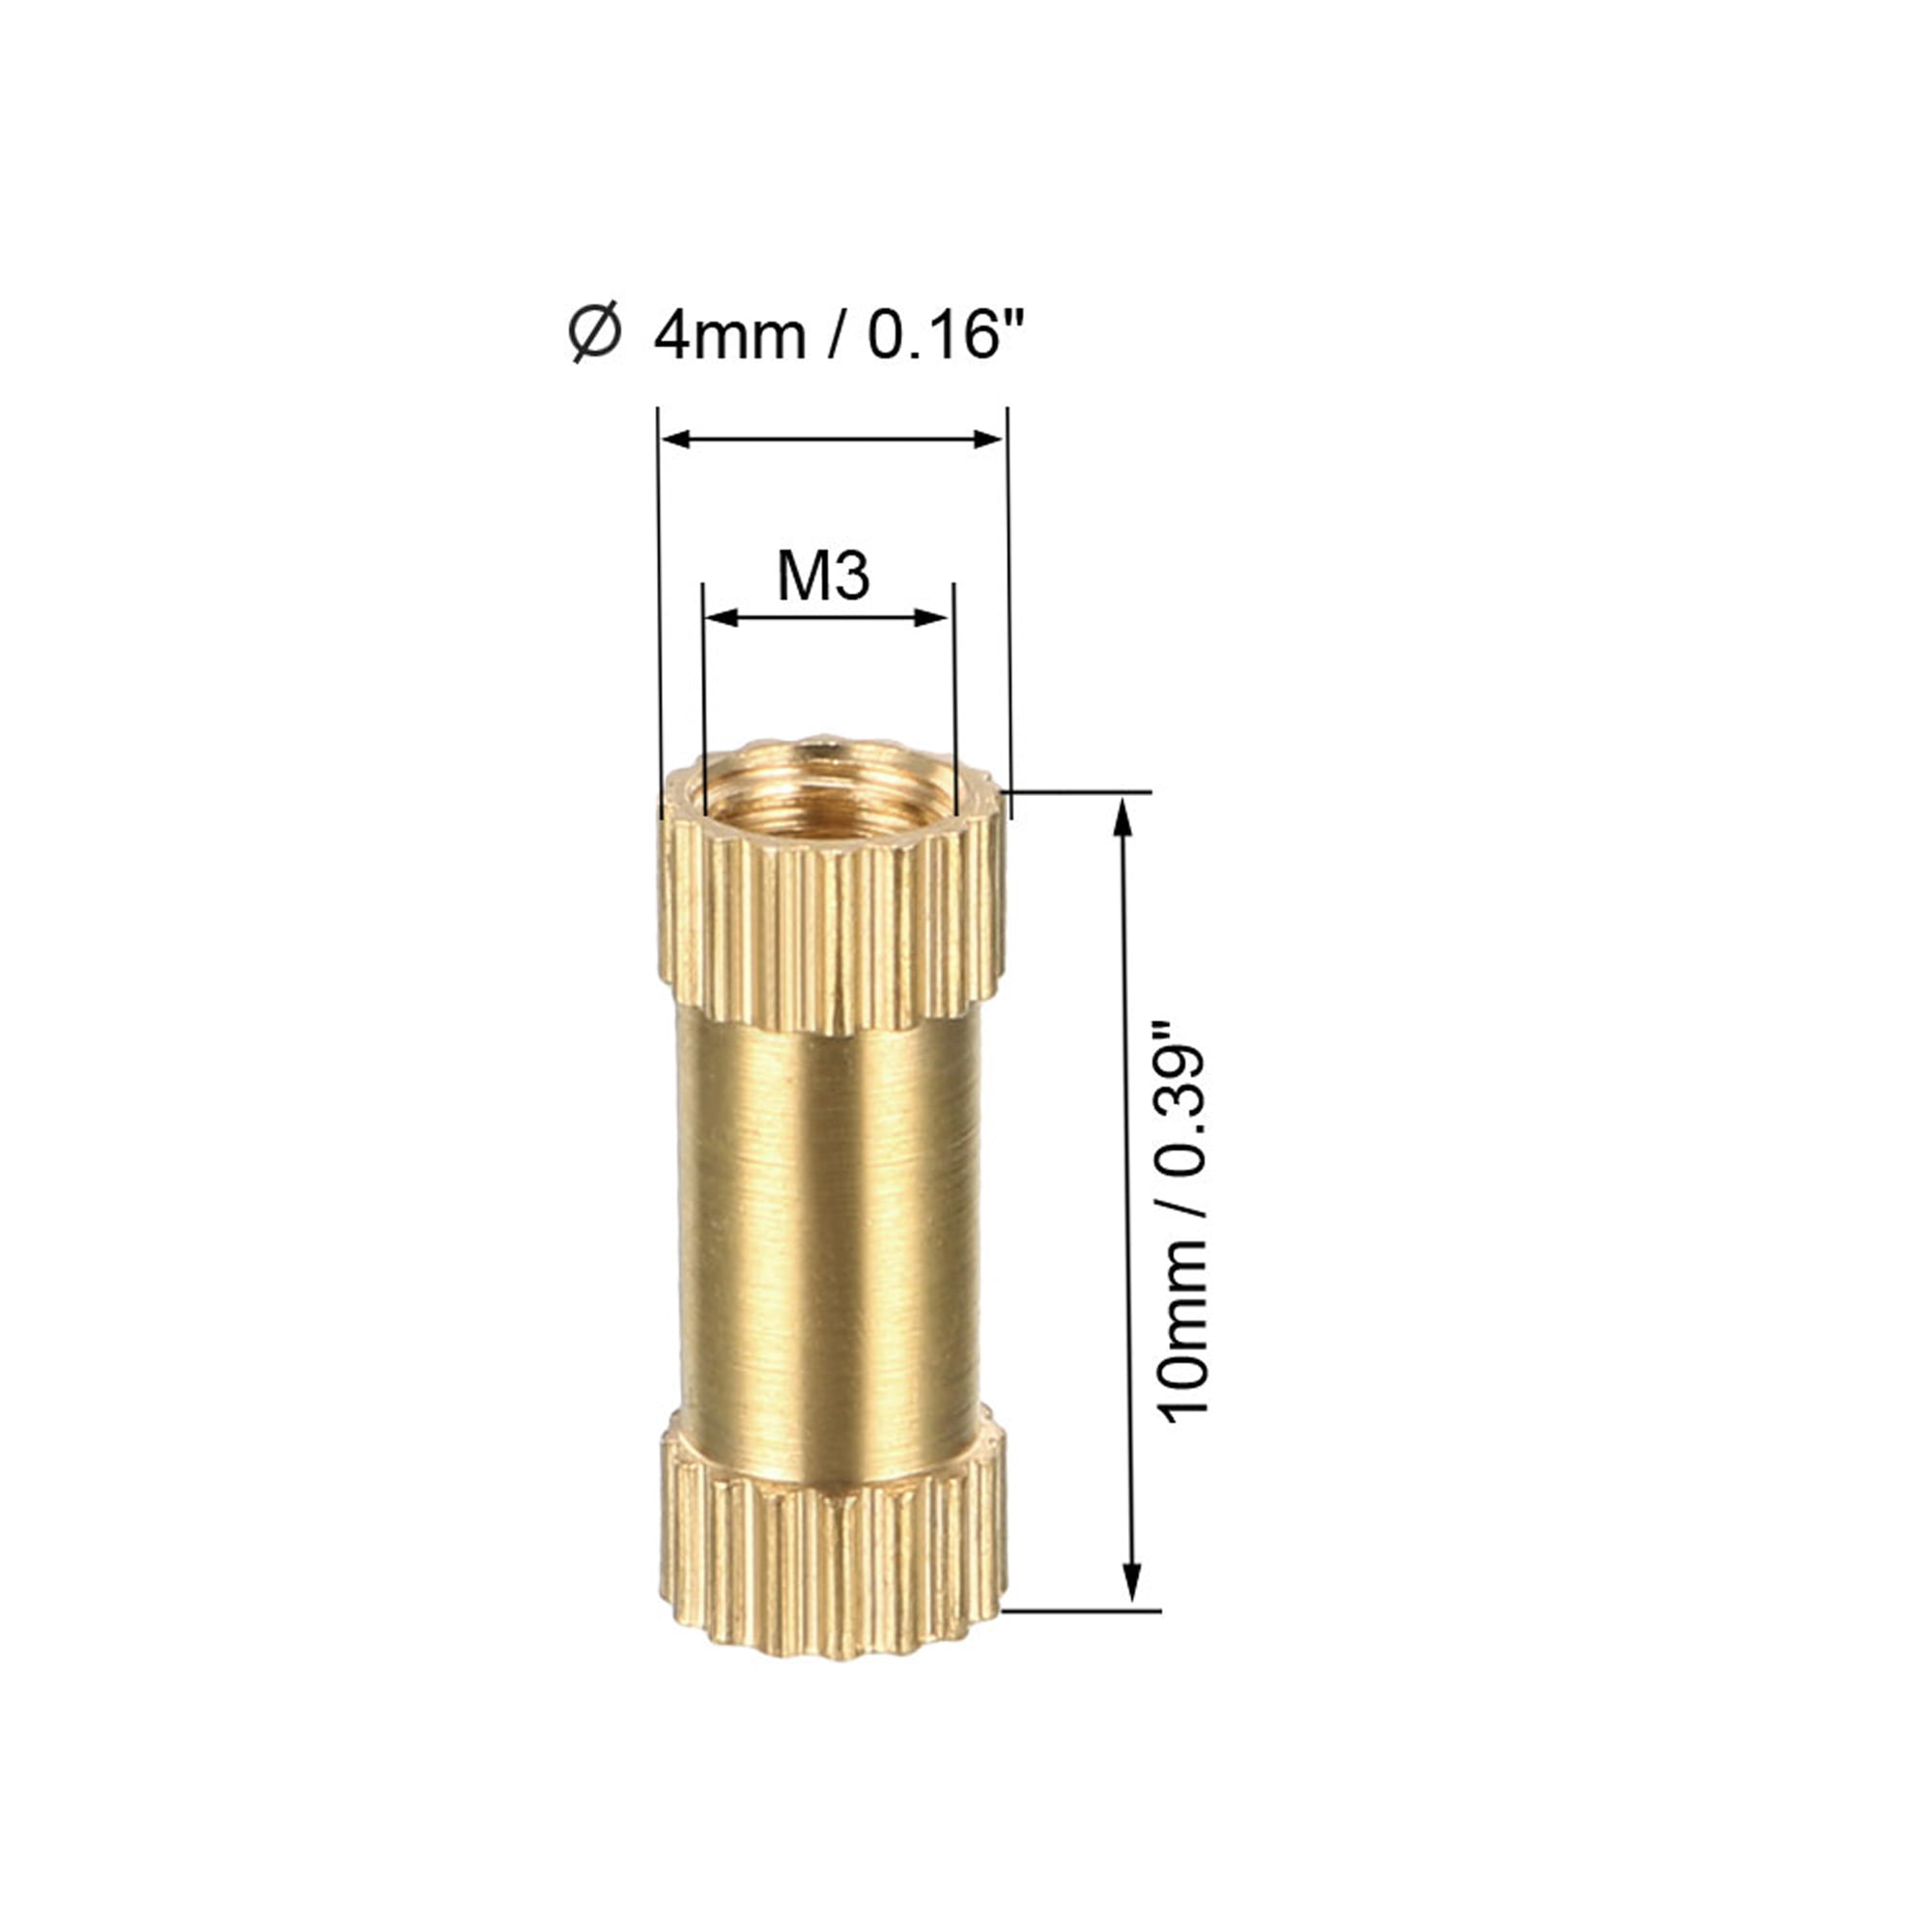 Pack of 50 sourcing map Knurled Threaded Insert M3 x 10mm OD x 4mm L Female Thread Brass Embedment Nuts